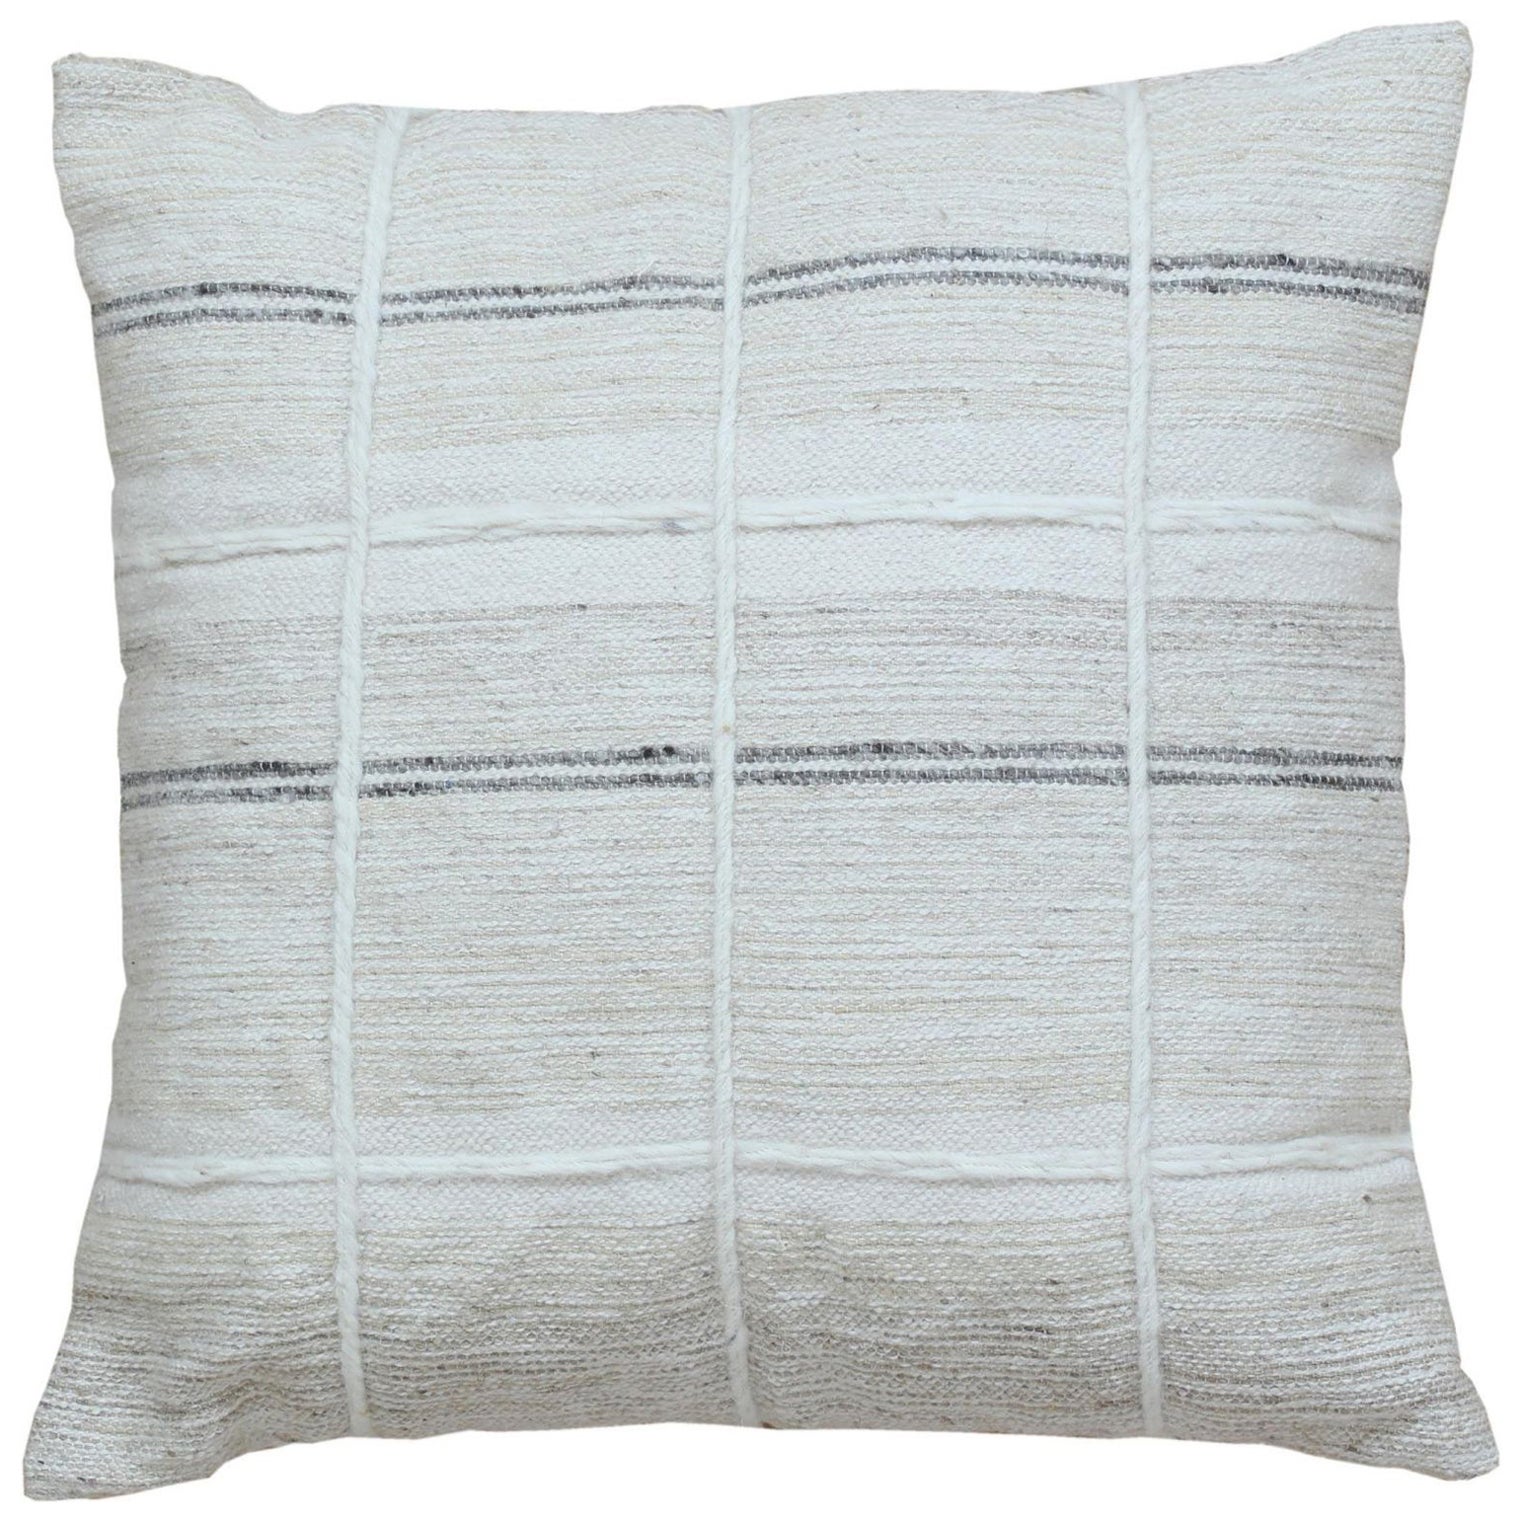 Geometric Modern Chic Wool and Cotton Pillow In Ivory